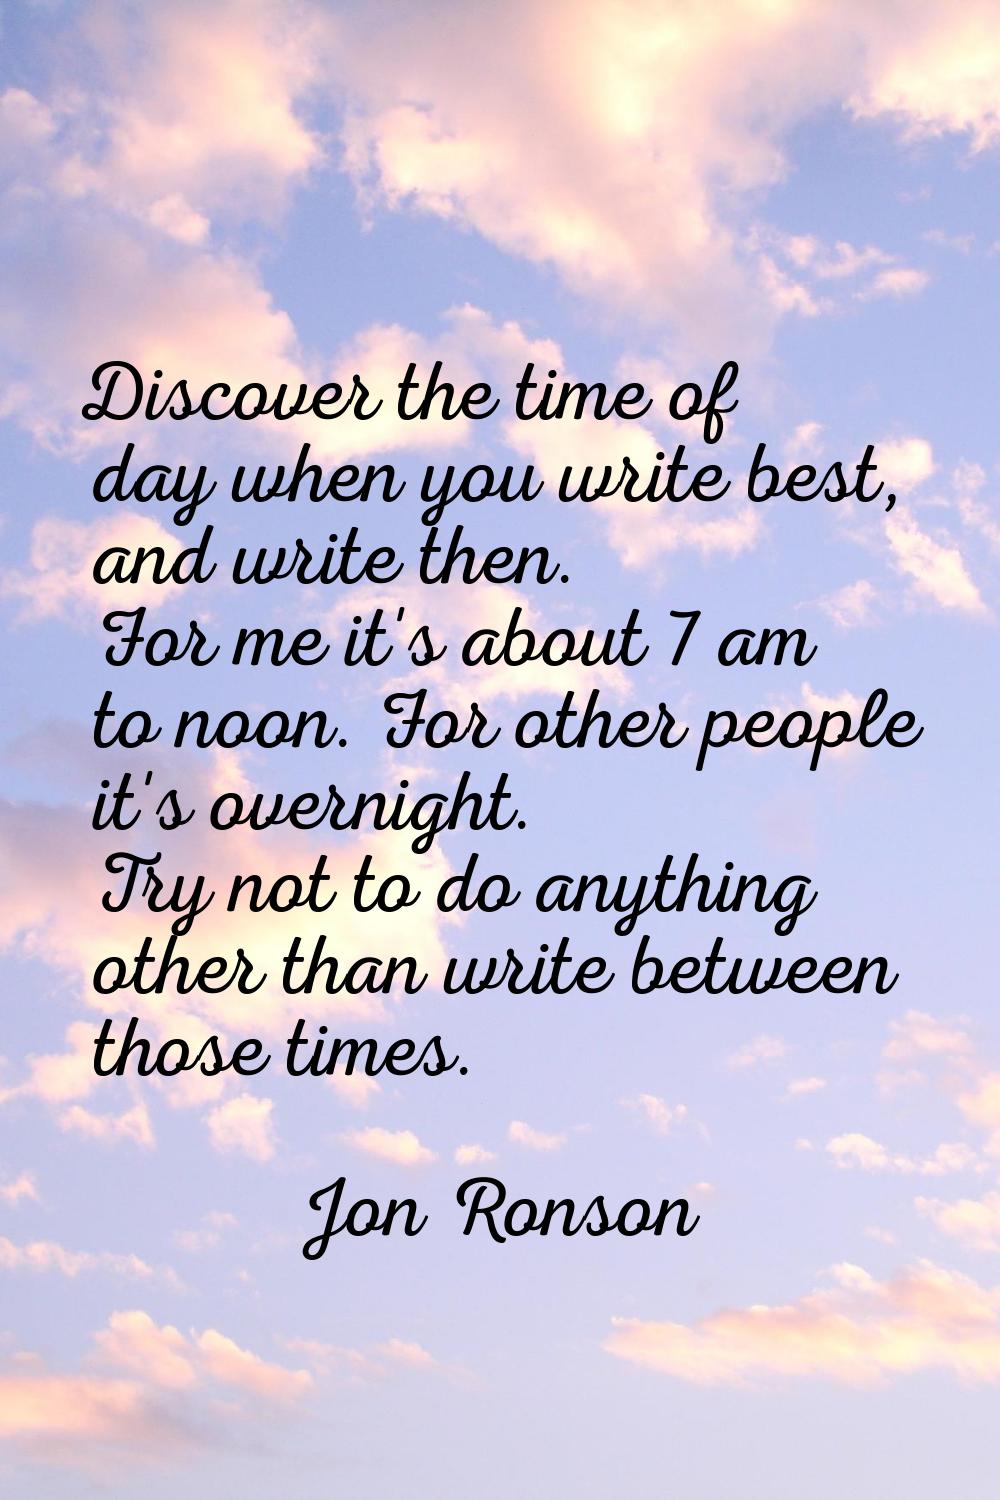 Discover the time of day when you write best, and write then. For me it's about 7 am to noon. For o